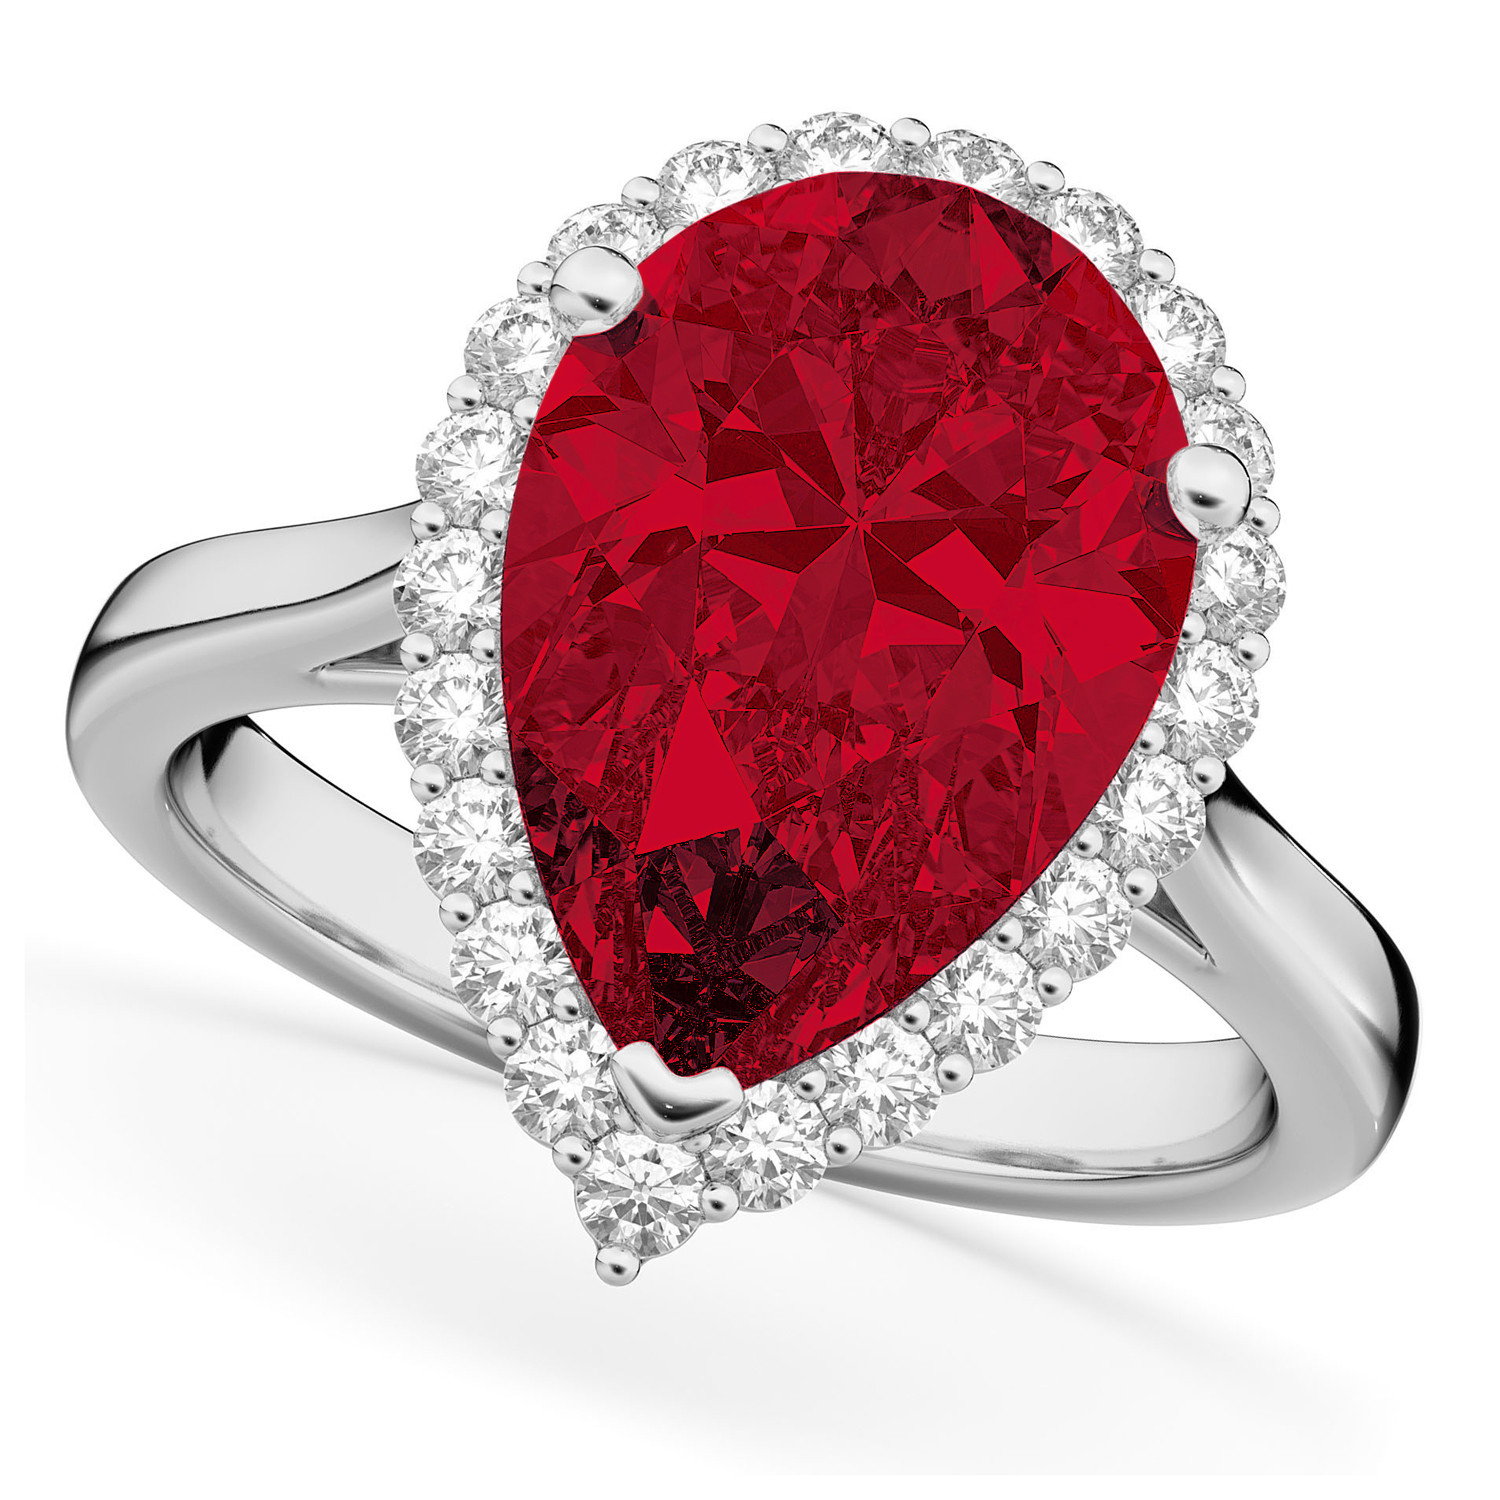 The Magnetic: Signed Pear Shaped Burma Ruby Engagement Ring